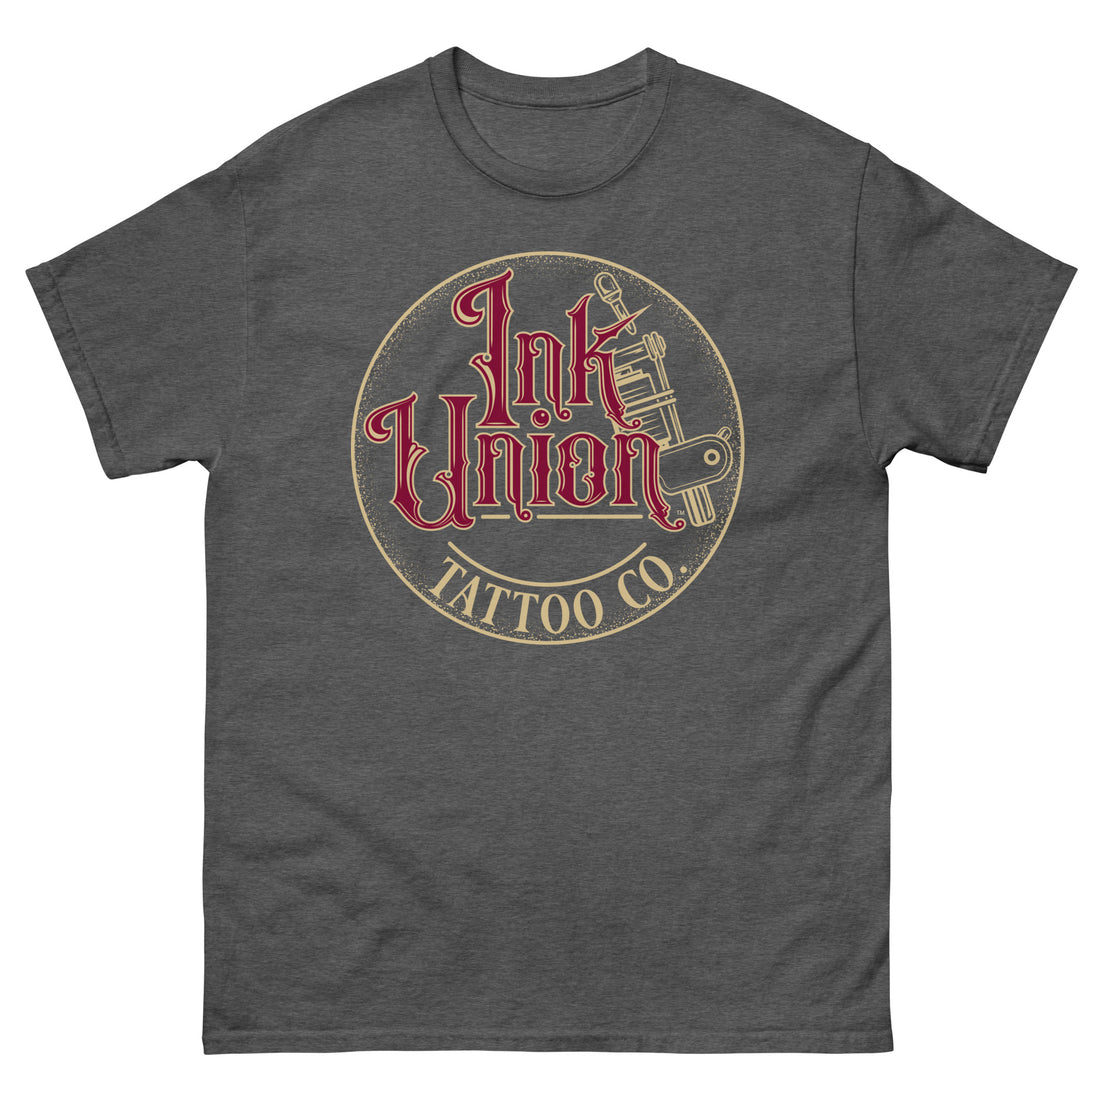 A dark grey t-shirt with a gold circle containing fancy lettering in red and gold that says Ink Union and a gold tattoo machine peeking out from behind on the right side. There is a dot work gradient inside the circle, and the words Tattoo Co. in gold are at the bottom of the design.